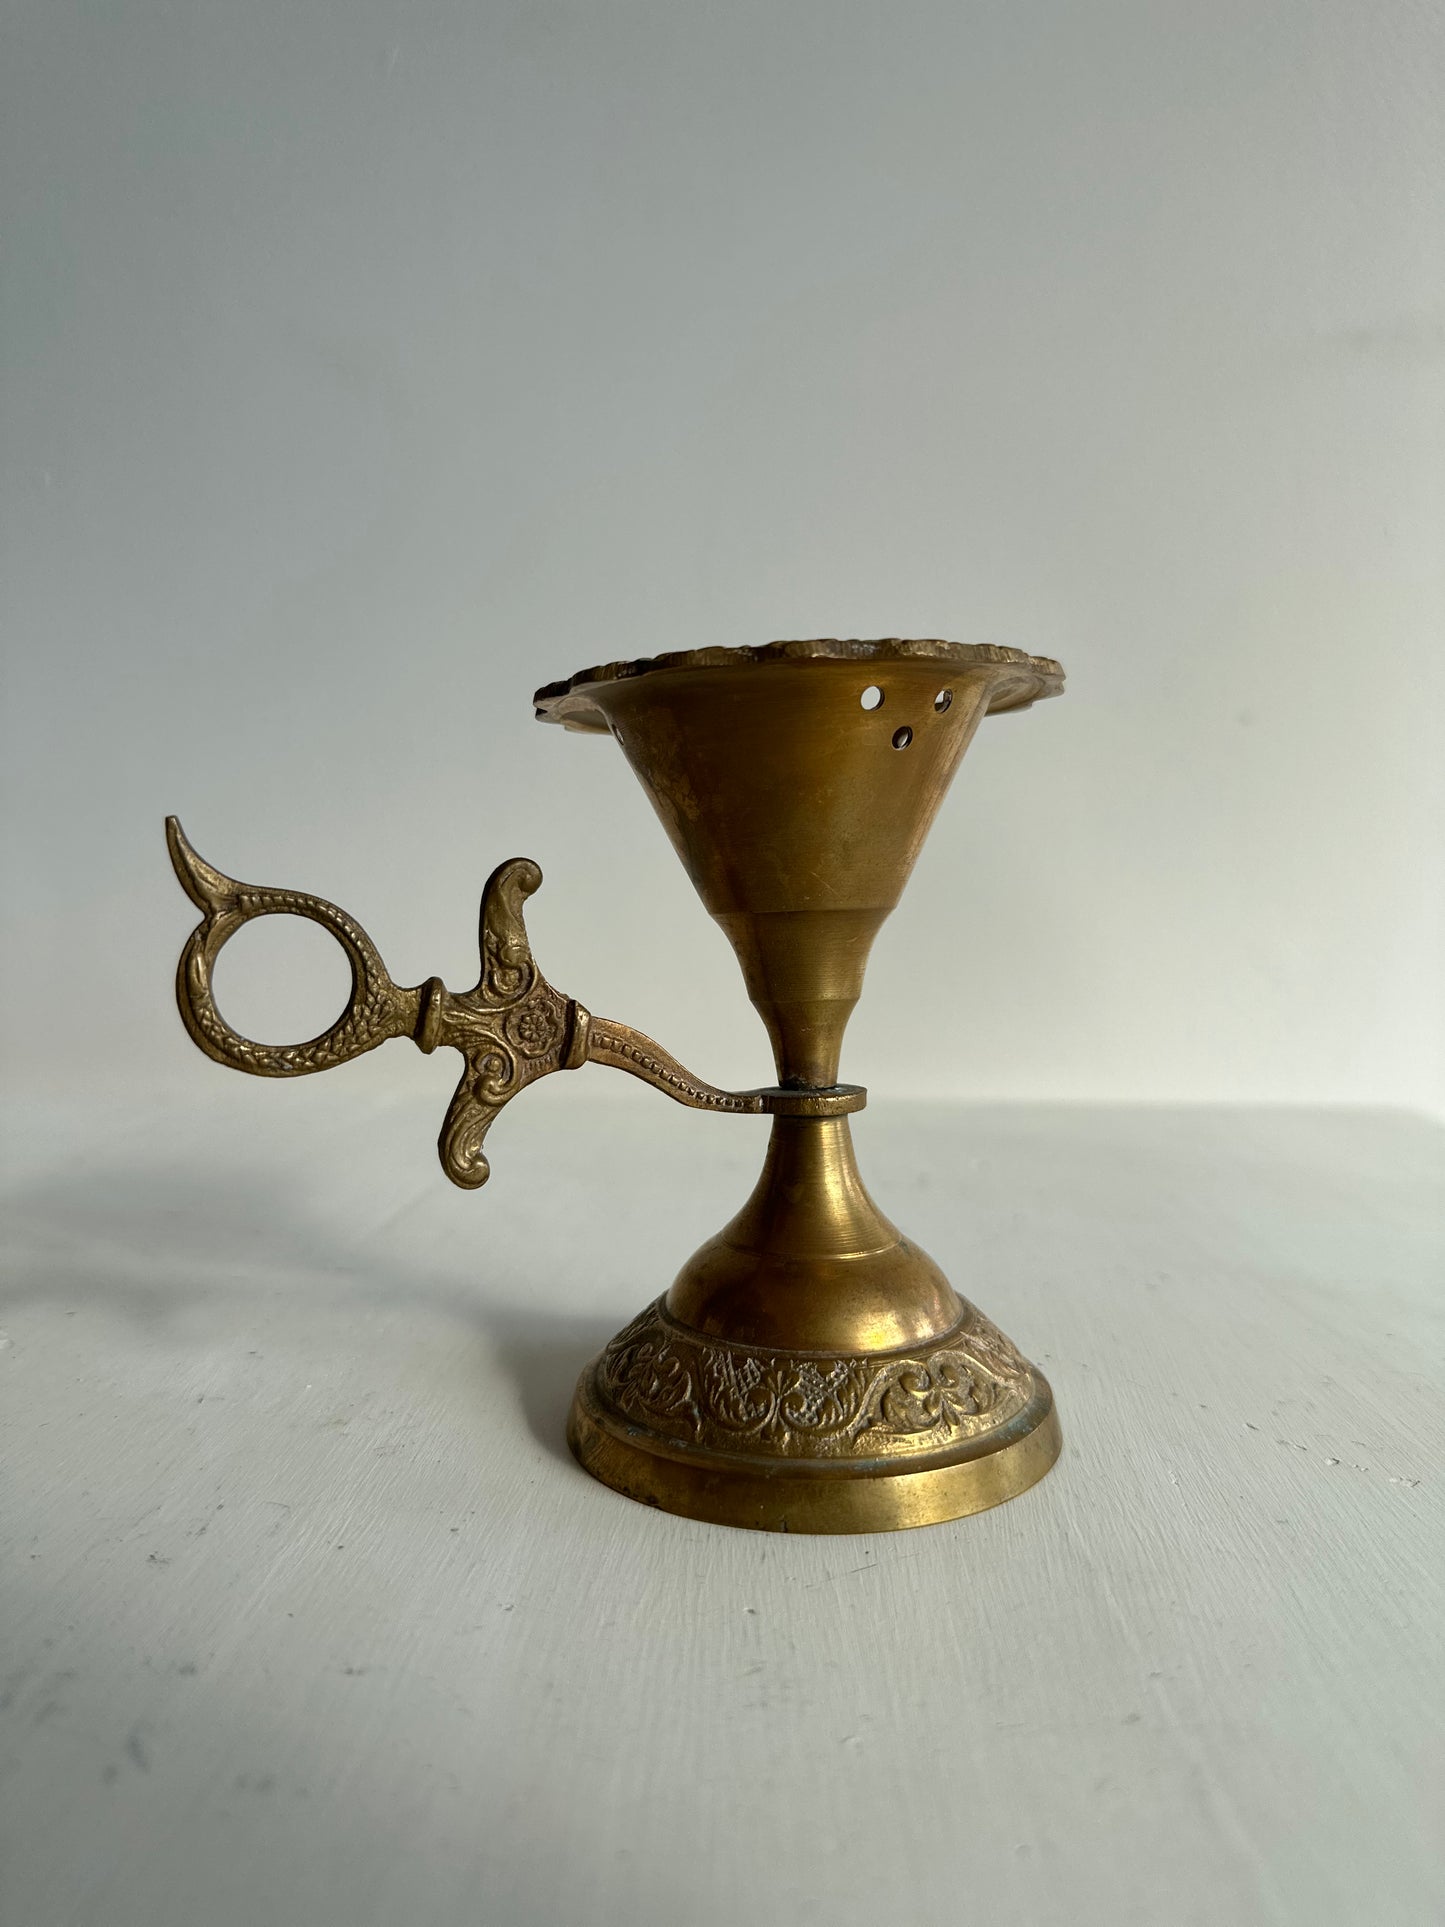 Brass Candle Holder - Ornate Handle